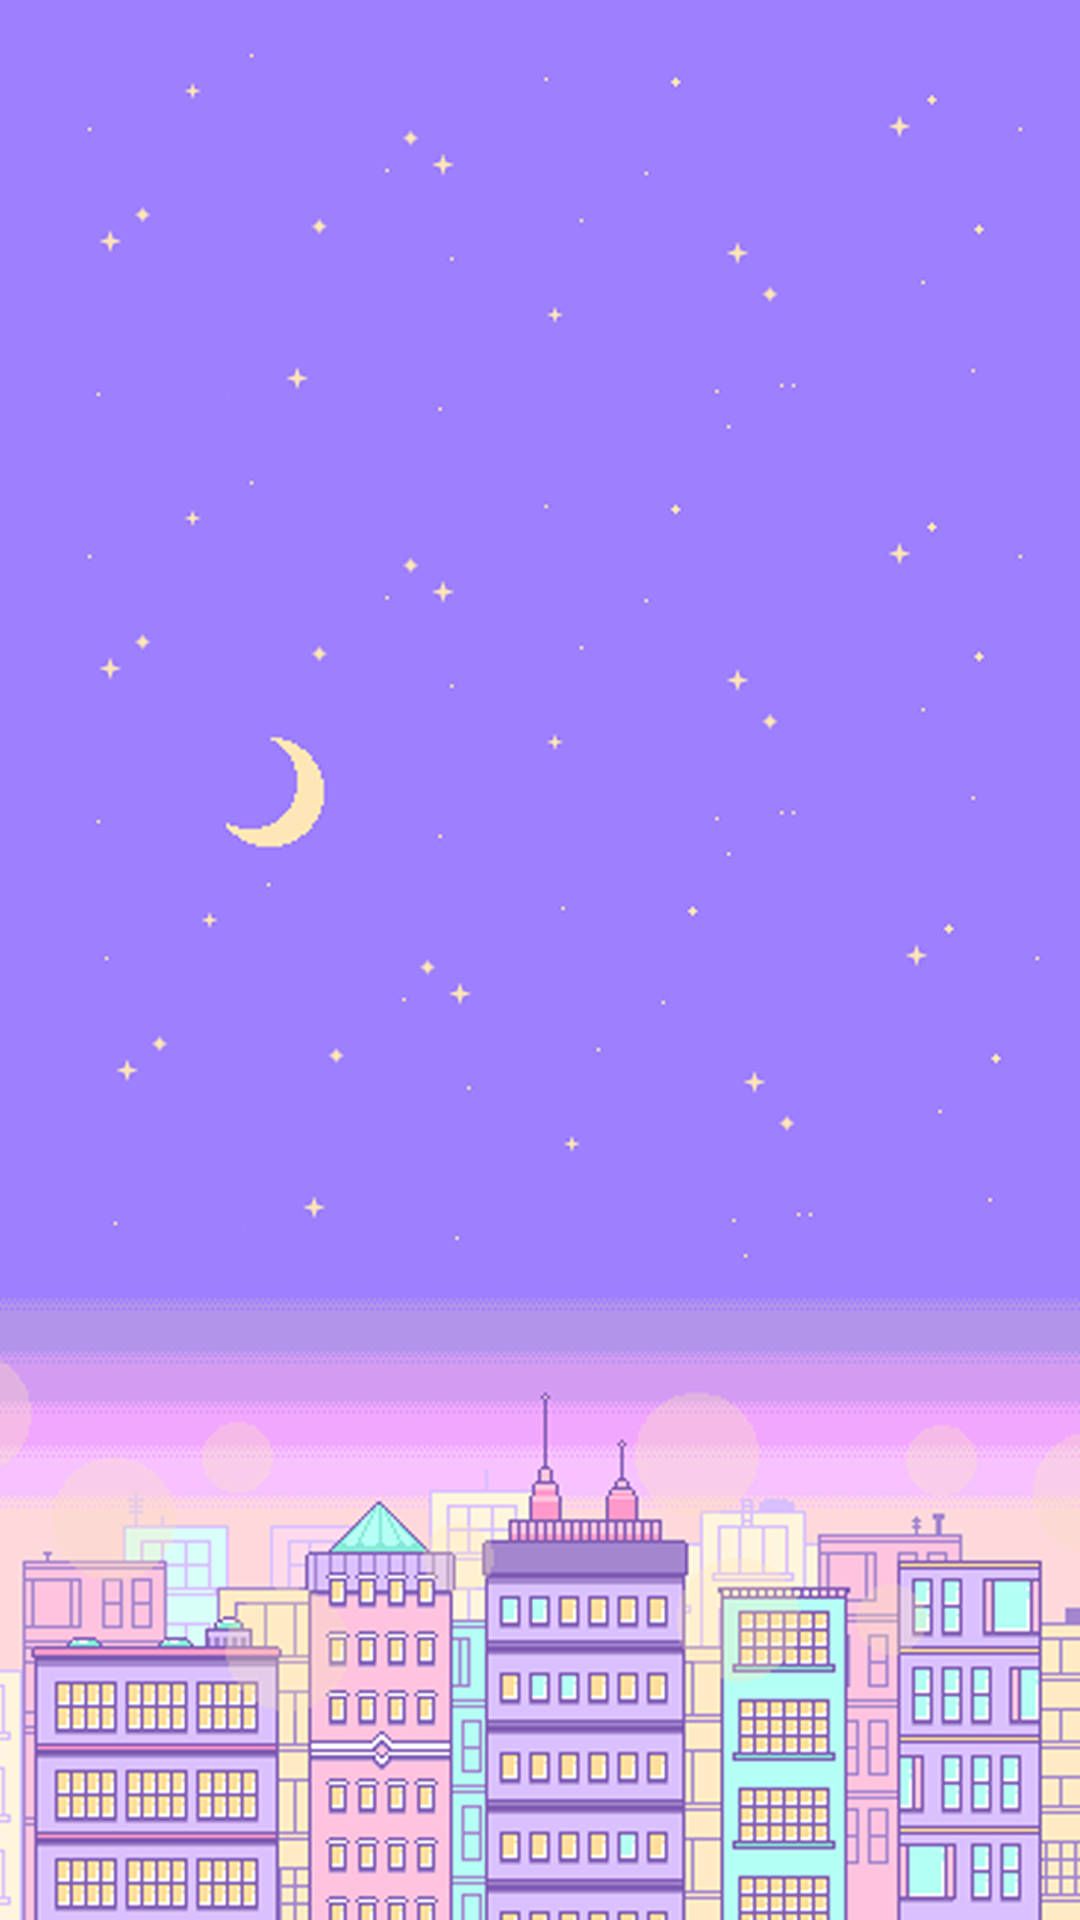 Download Pastel Aesthetic City Skyline At Night Wallpaper